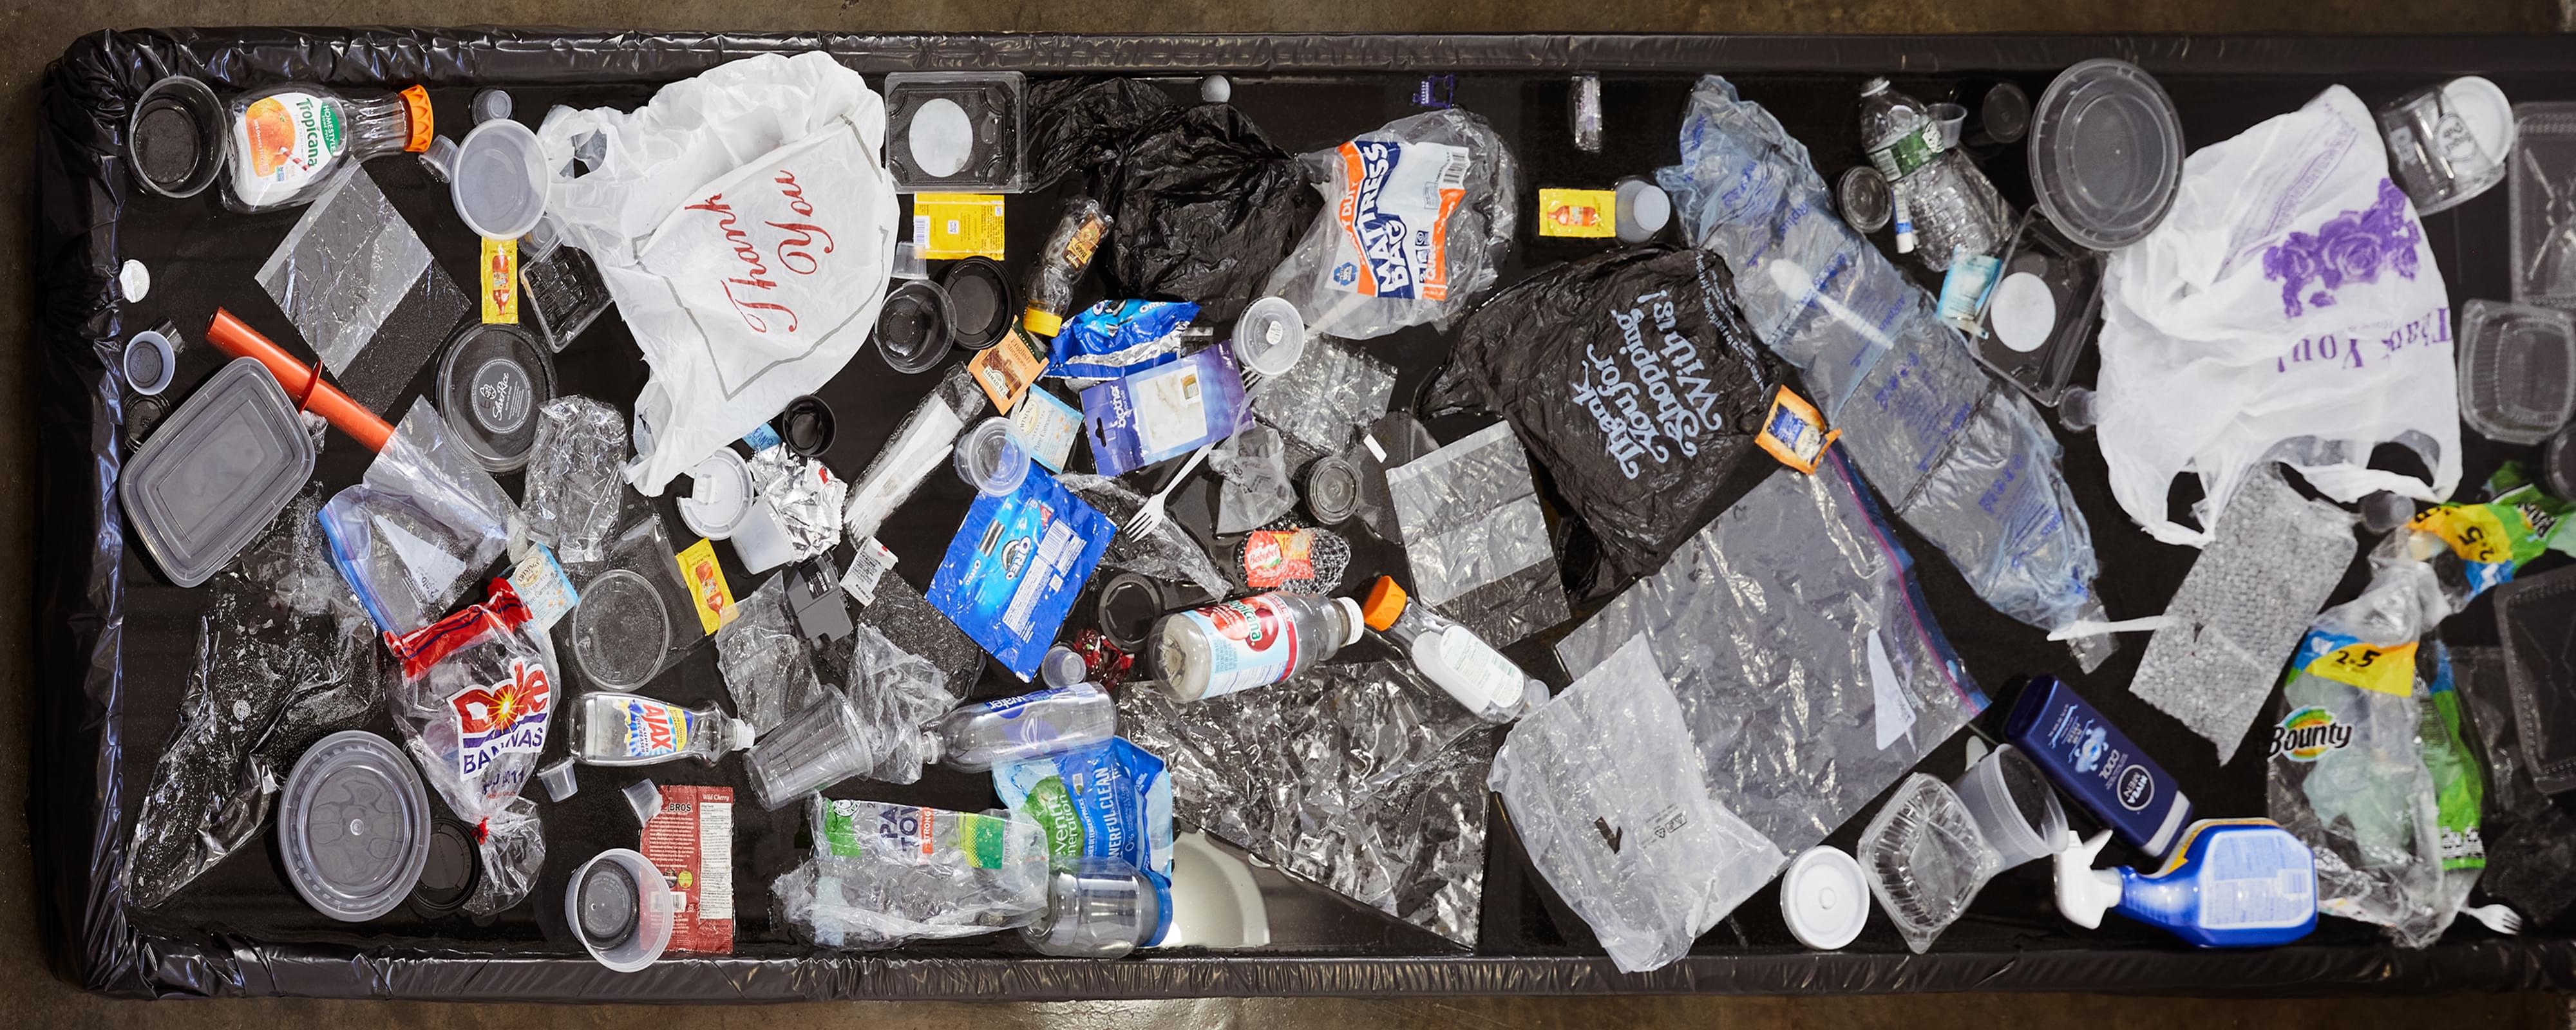 Top-down photograph of collection of about 50 pieces of the artist's single use plastic floating in a small black pool. Most prominently featured are two plastic 'Thank You' shopping bags.